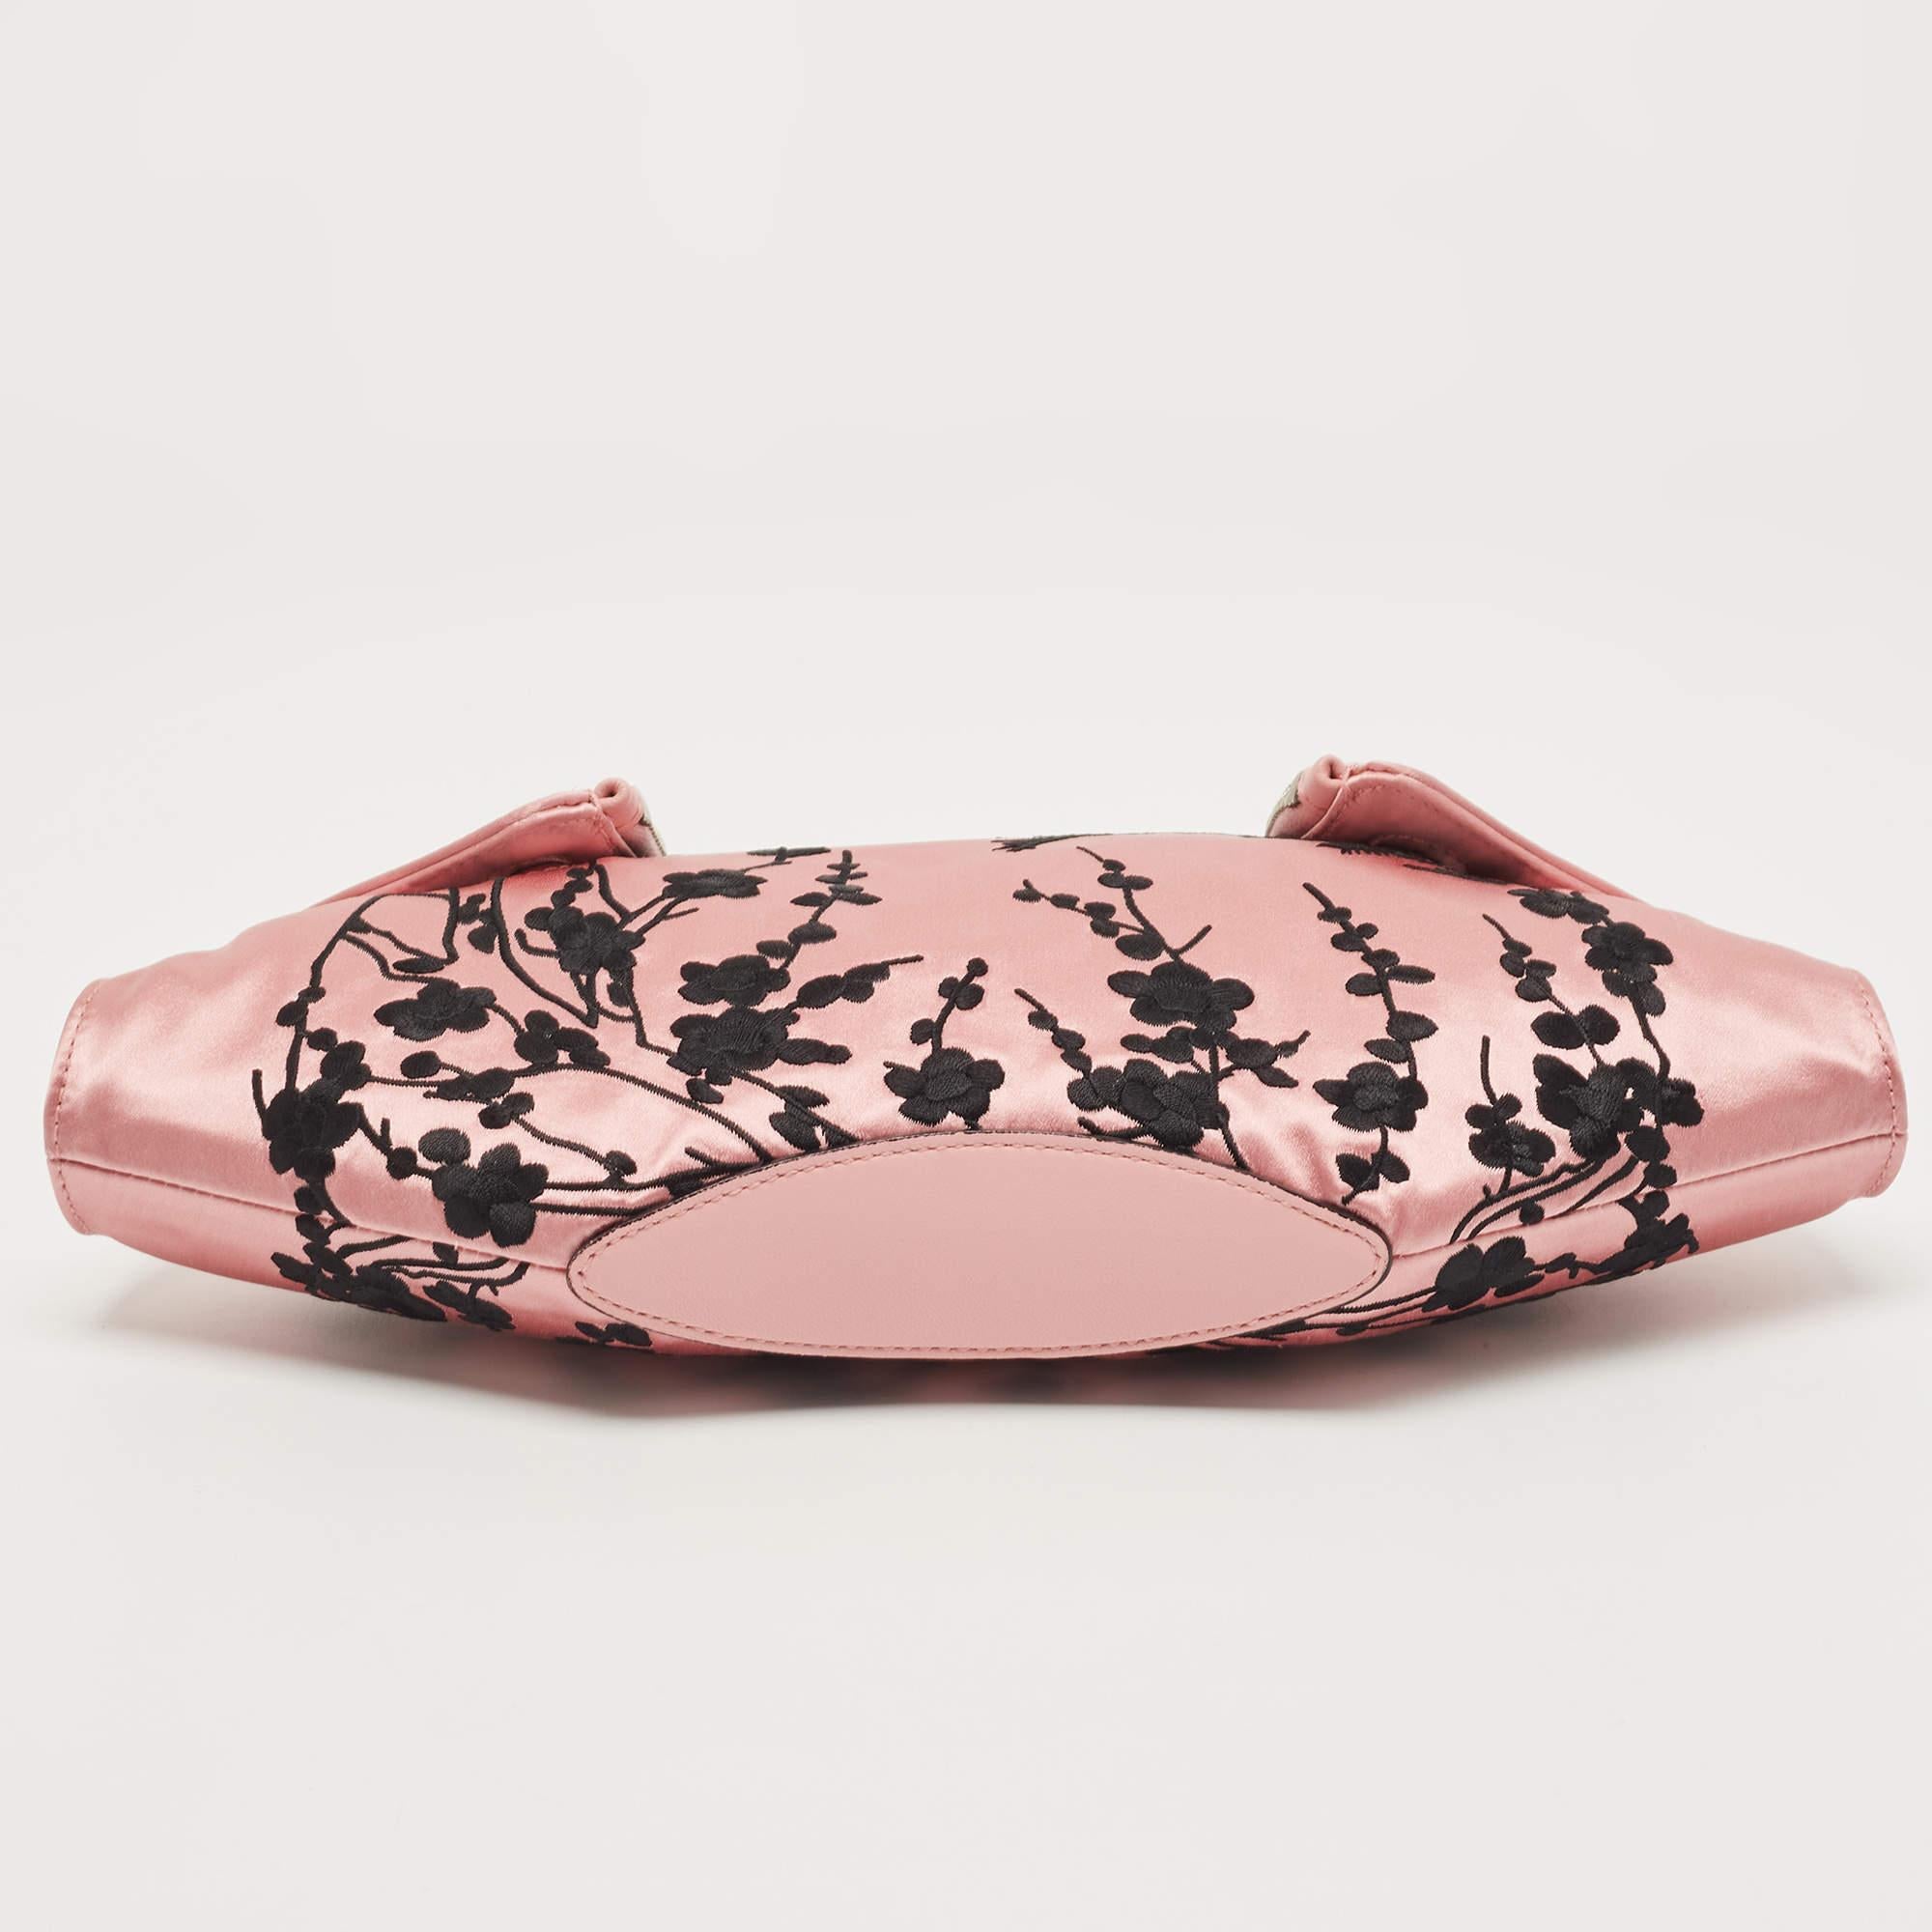 Women's Alexander McQueen Pink/Black Embroidered Satin and Leather De Manta Clutch